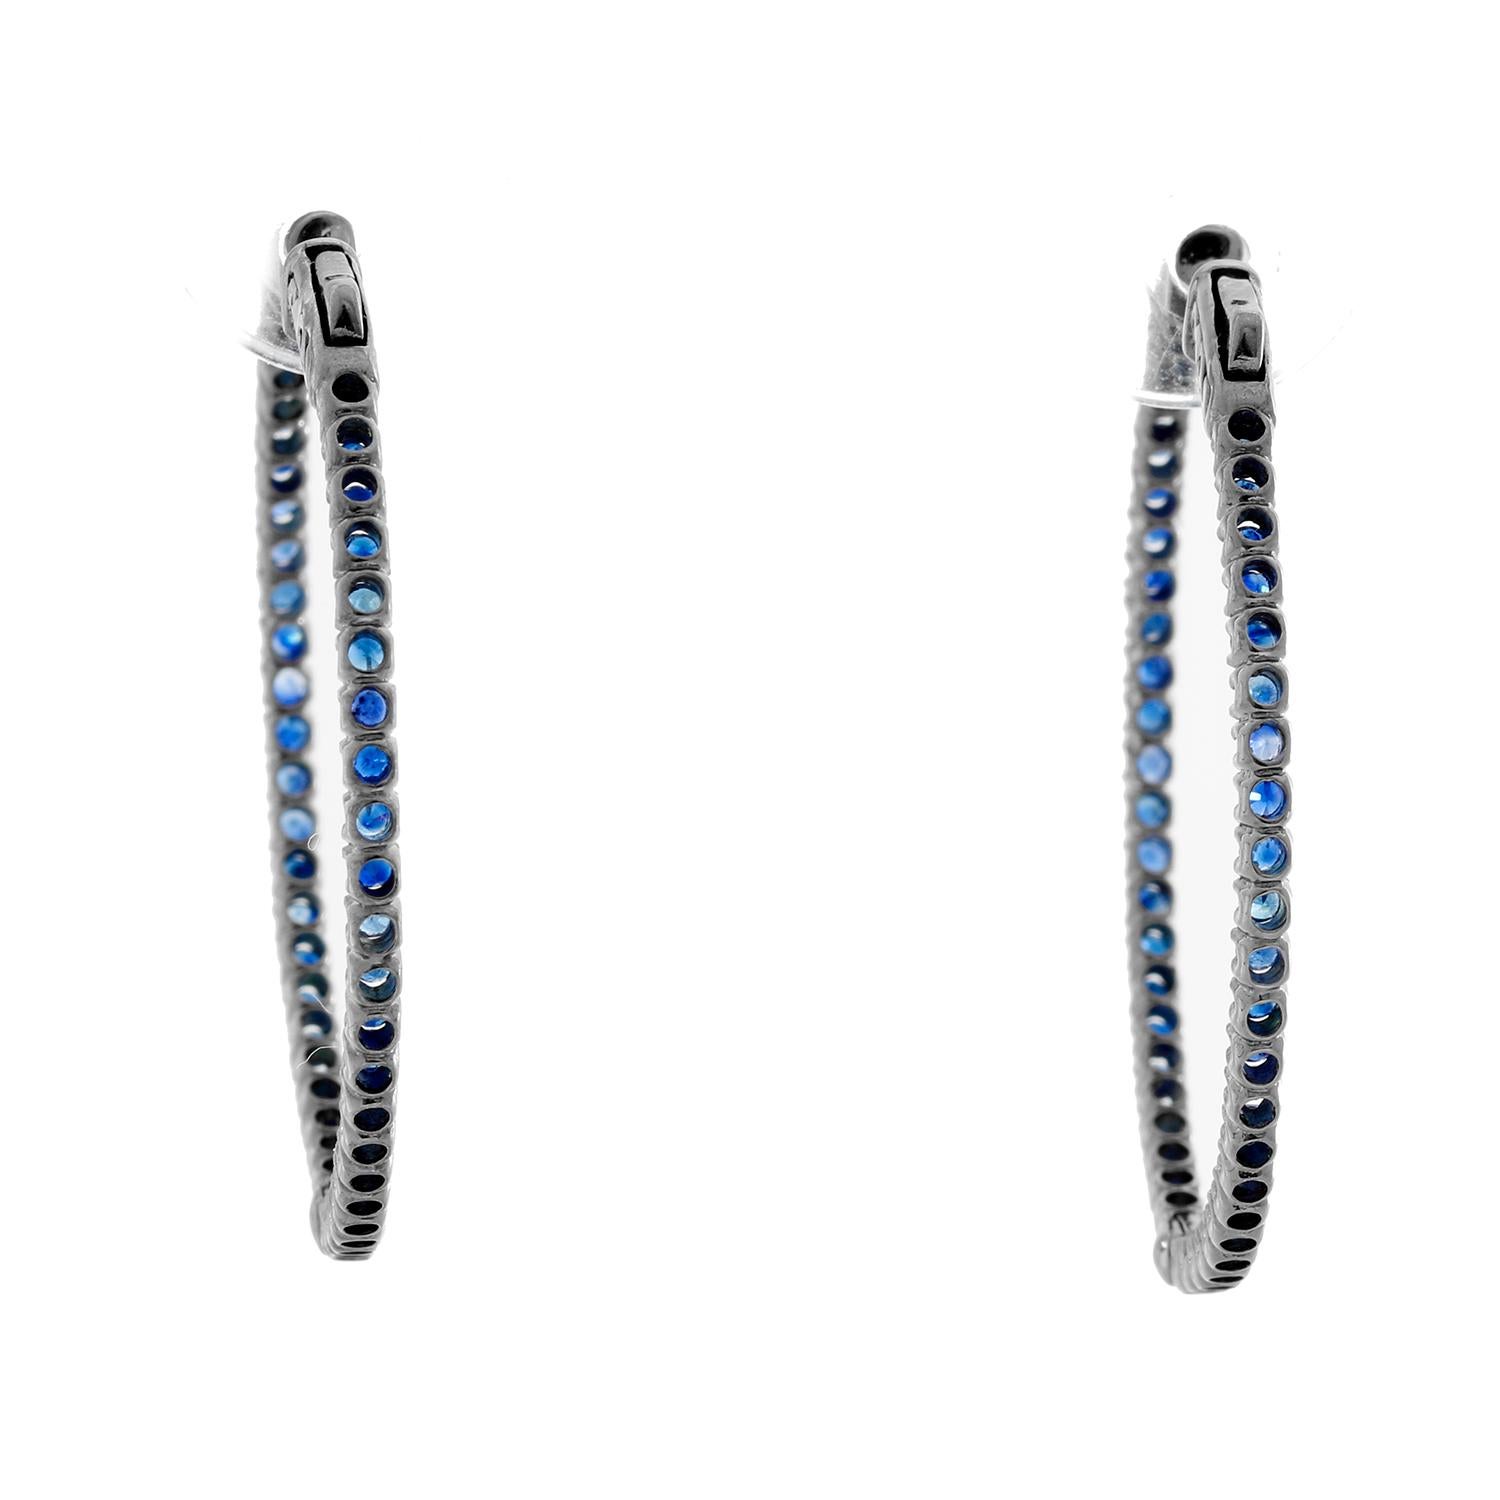 Sapphire Silver Inside Out Hoops  - 3.66 cts of Sapphires set in silver. 1 1/2 inch in diameter. Total weight 7.1 grams. 